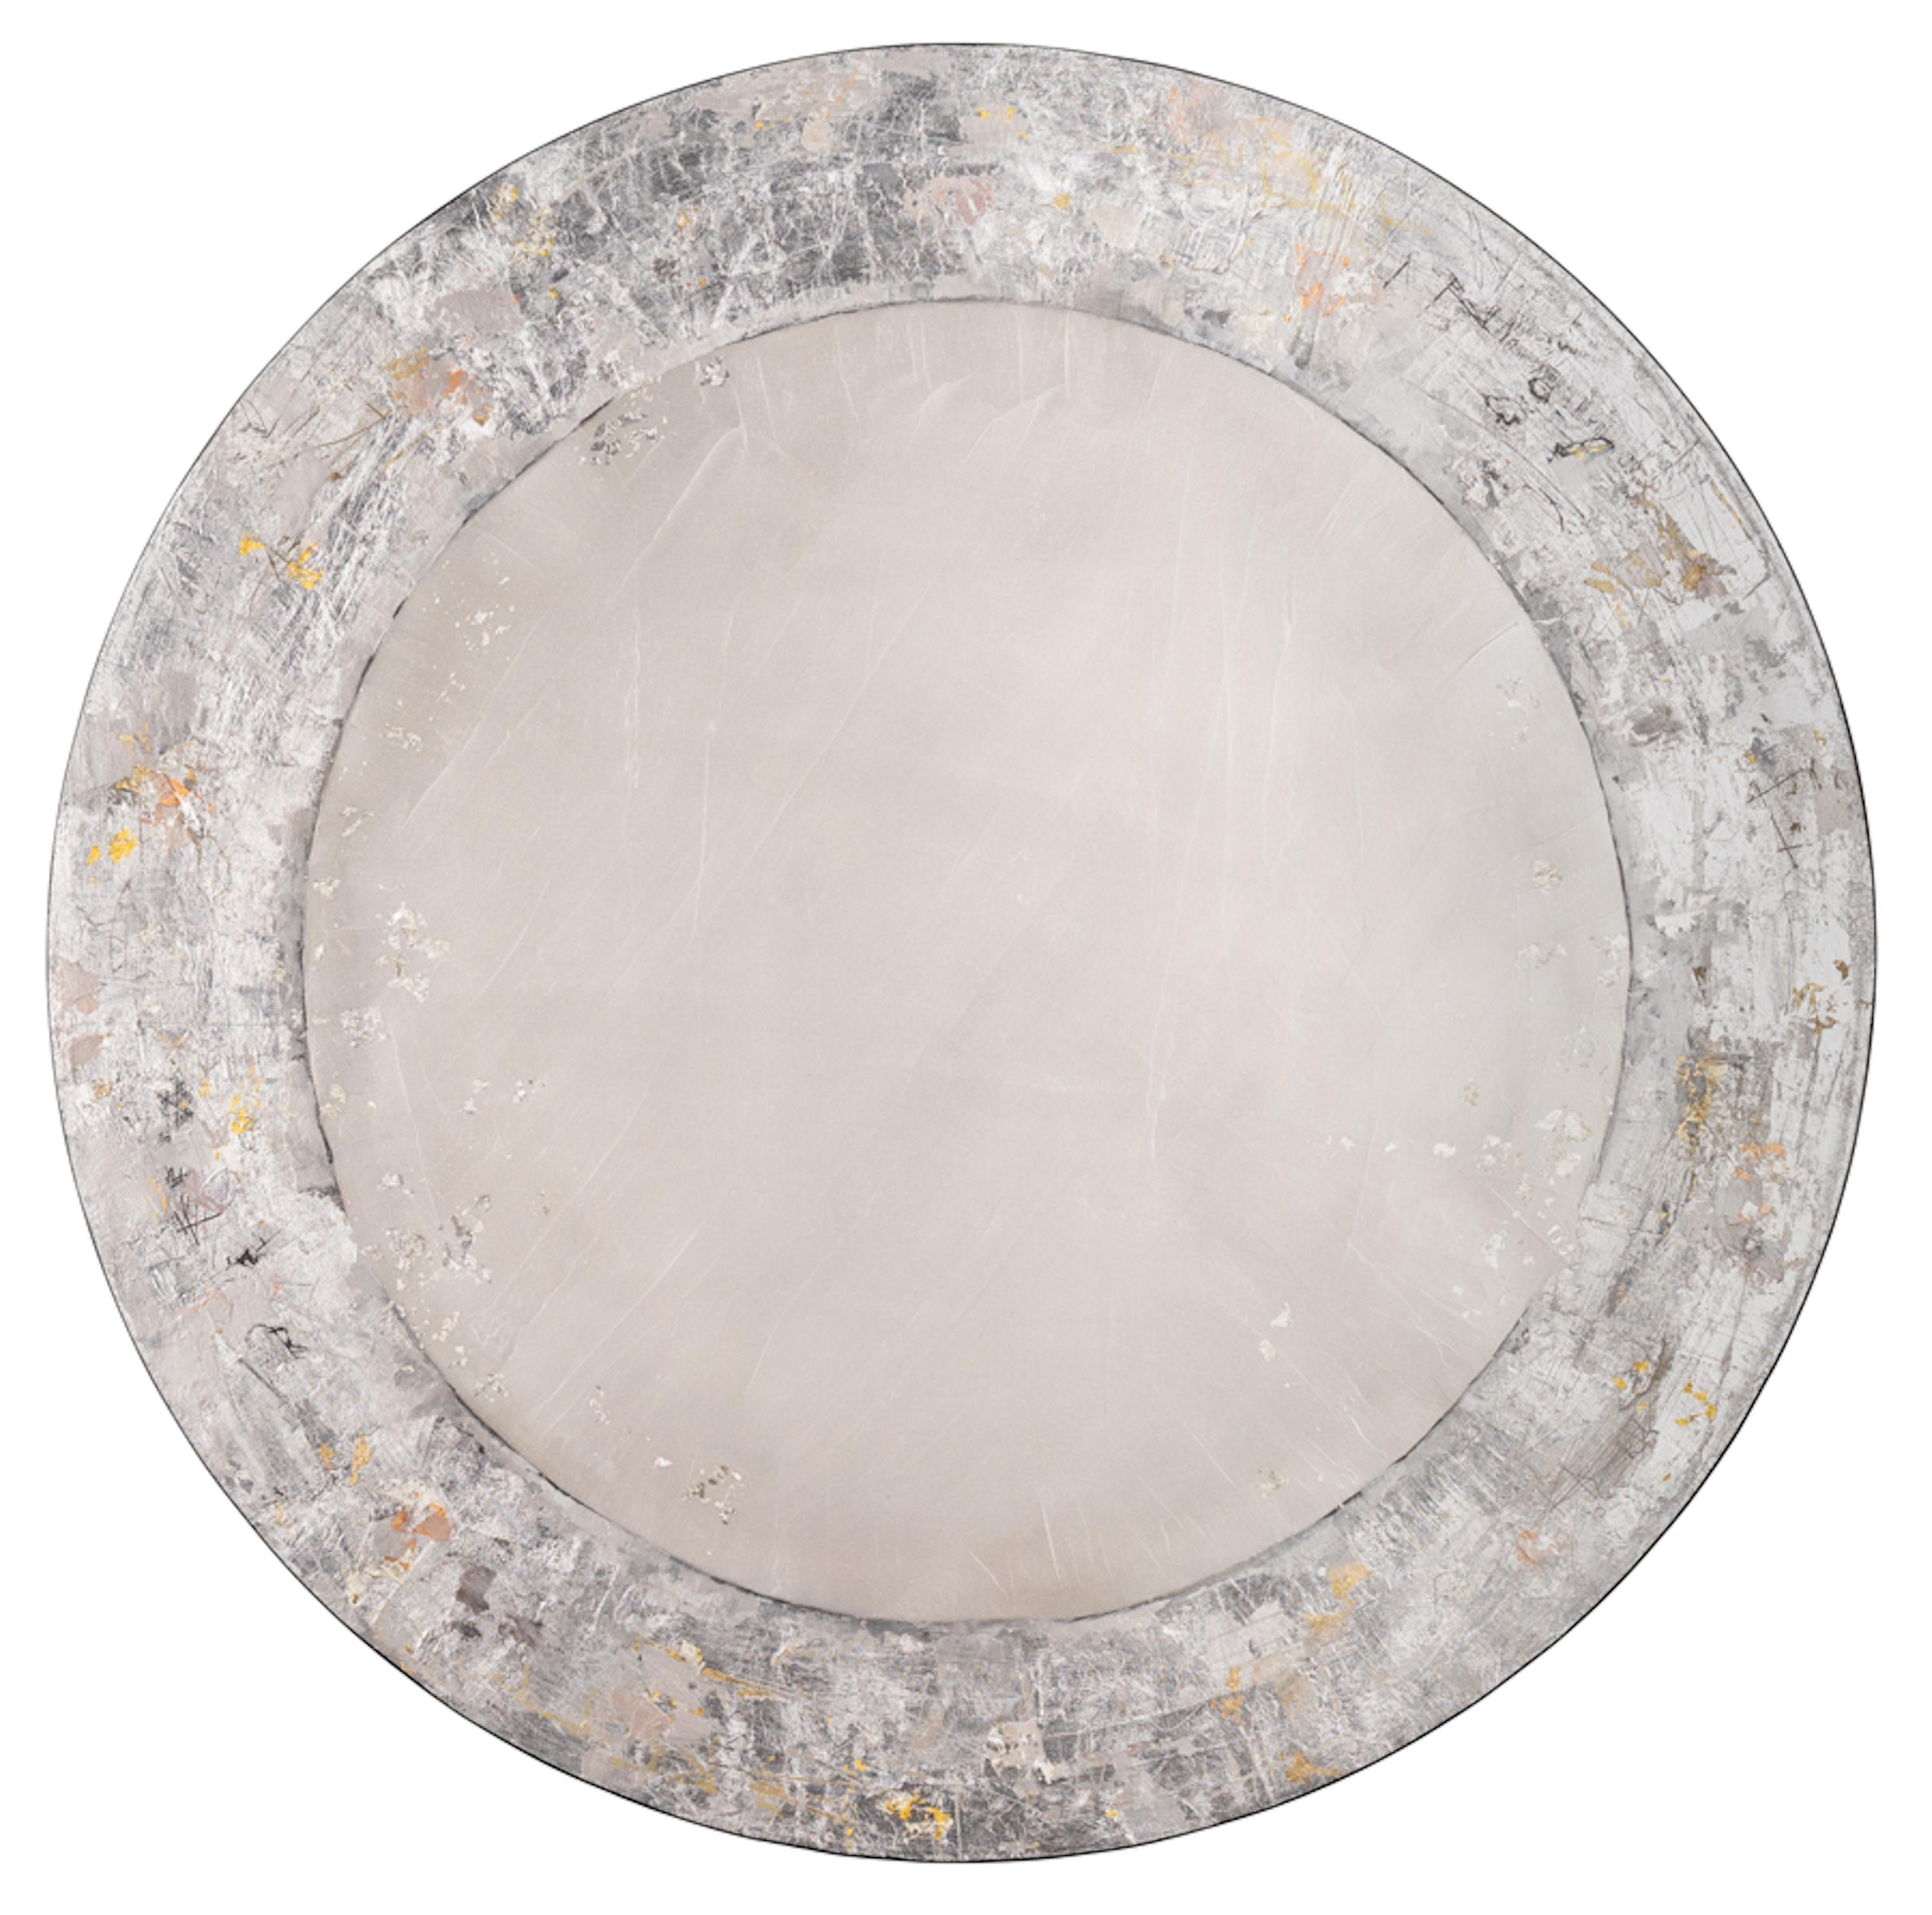 Takefumi Hori Abstract Painting - "Circle No. 170" Round Neutral Mixed Media Artwork with Texture and Metal Leaf